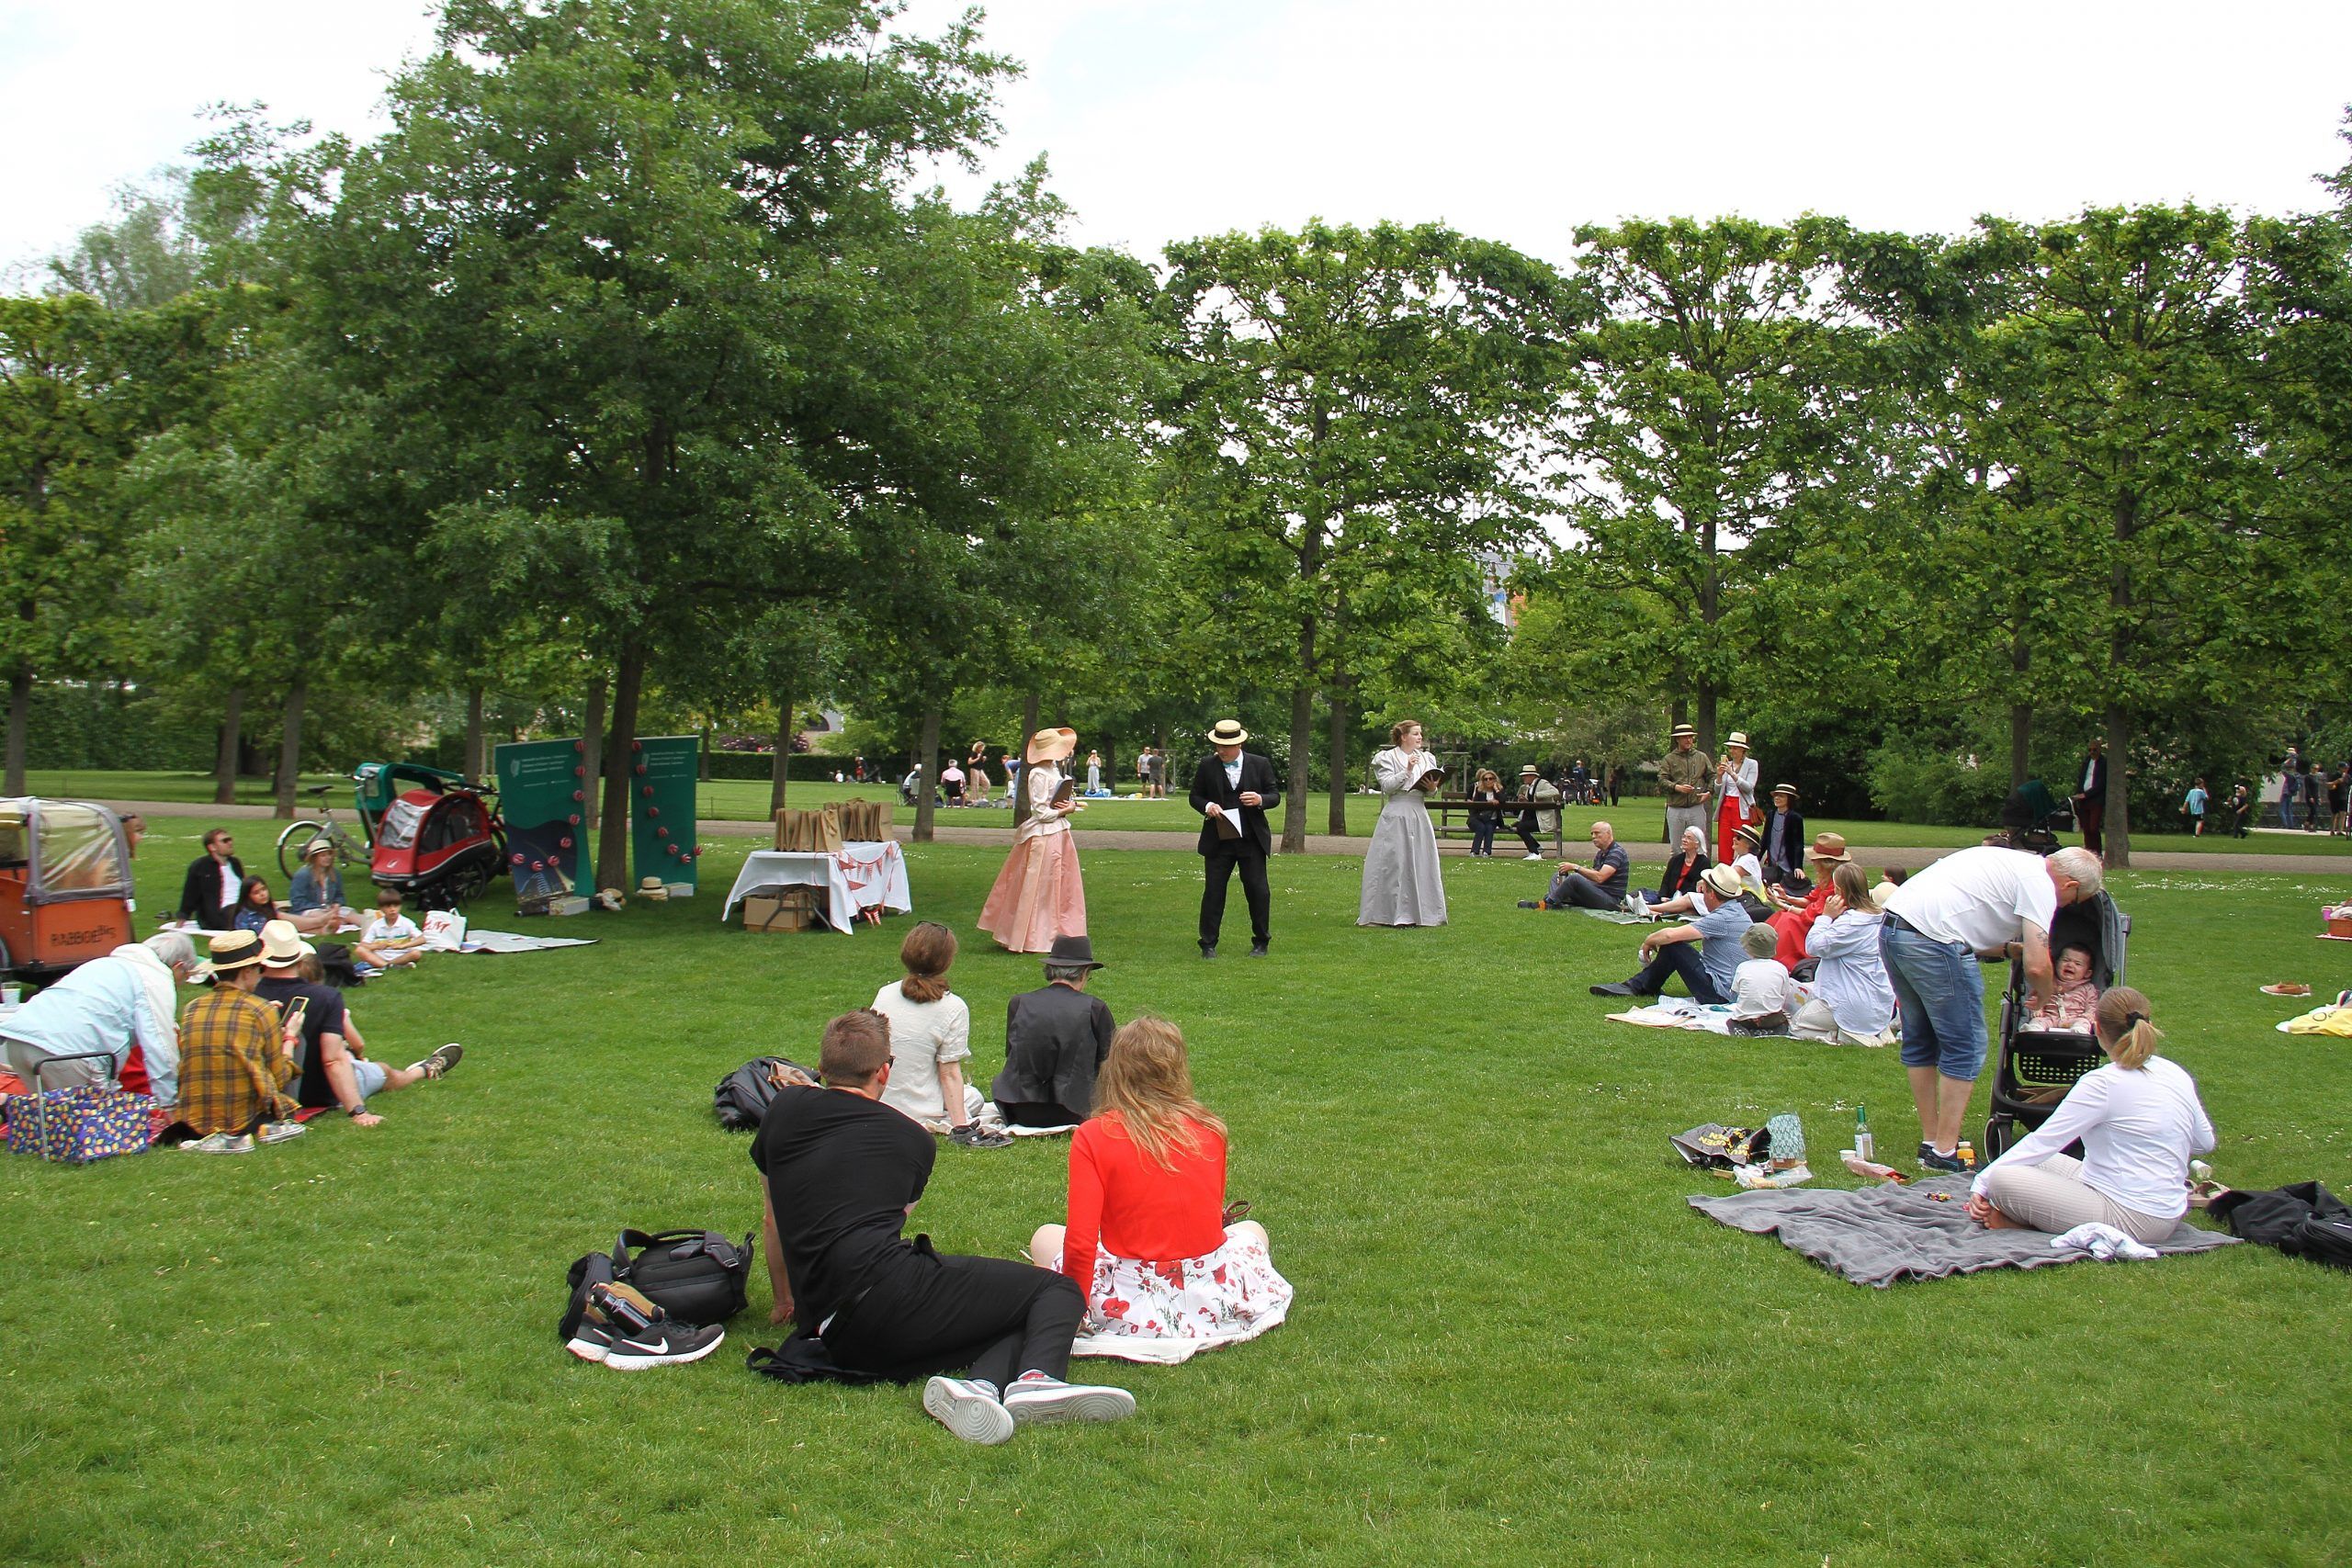 Picnicking in the park with the cool cats of Copenhagen